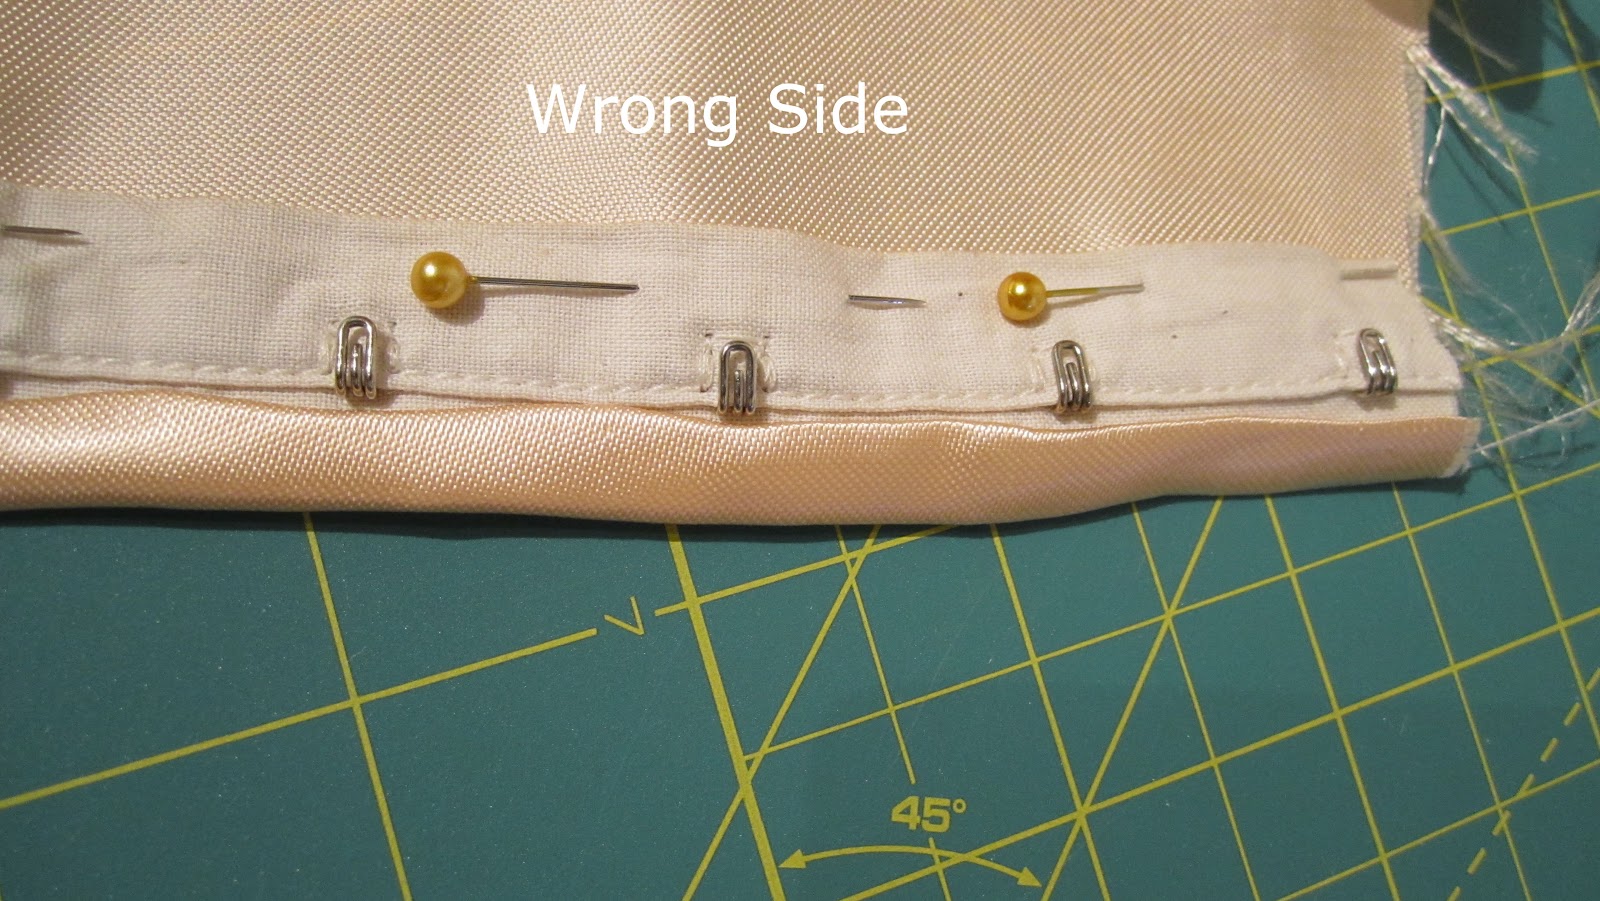 How to Sew a Hook and Eye